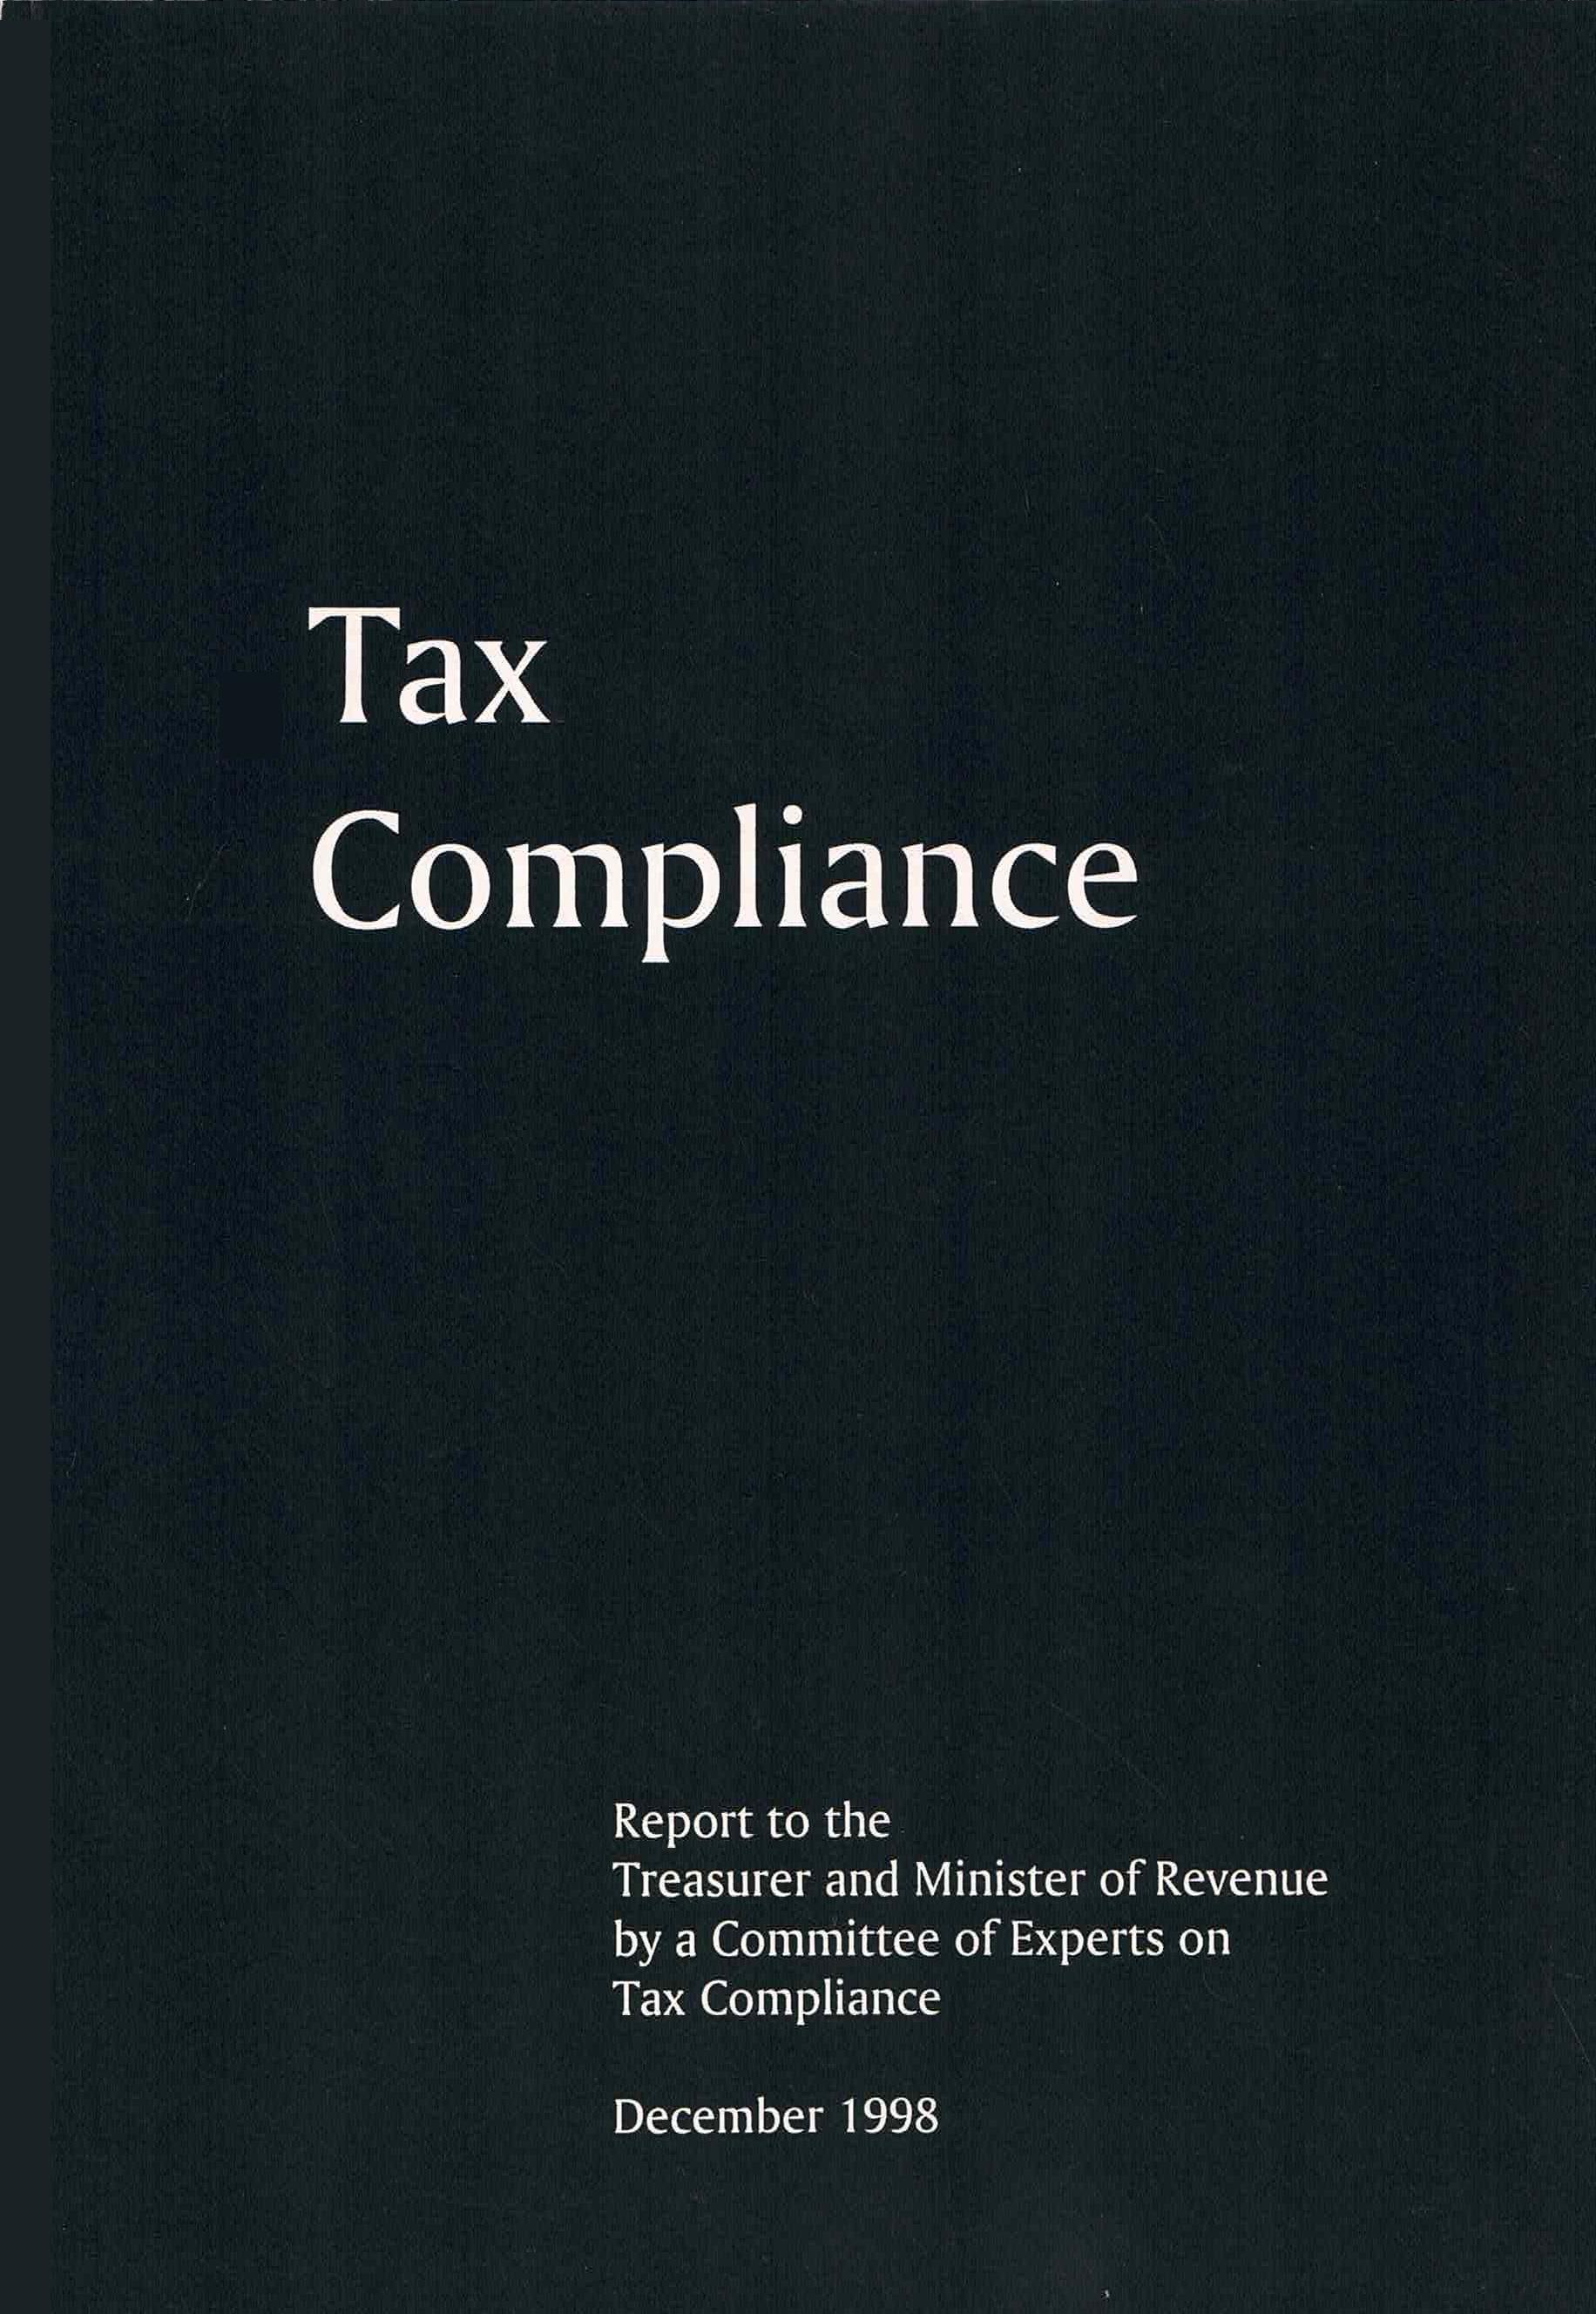 Publication cover image. Title = Tax compliance - report to the Treasurer and Minister of Revenue by a Committee of Experts on Tax Compliance. December 1998.